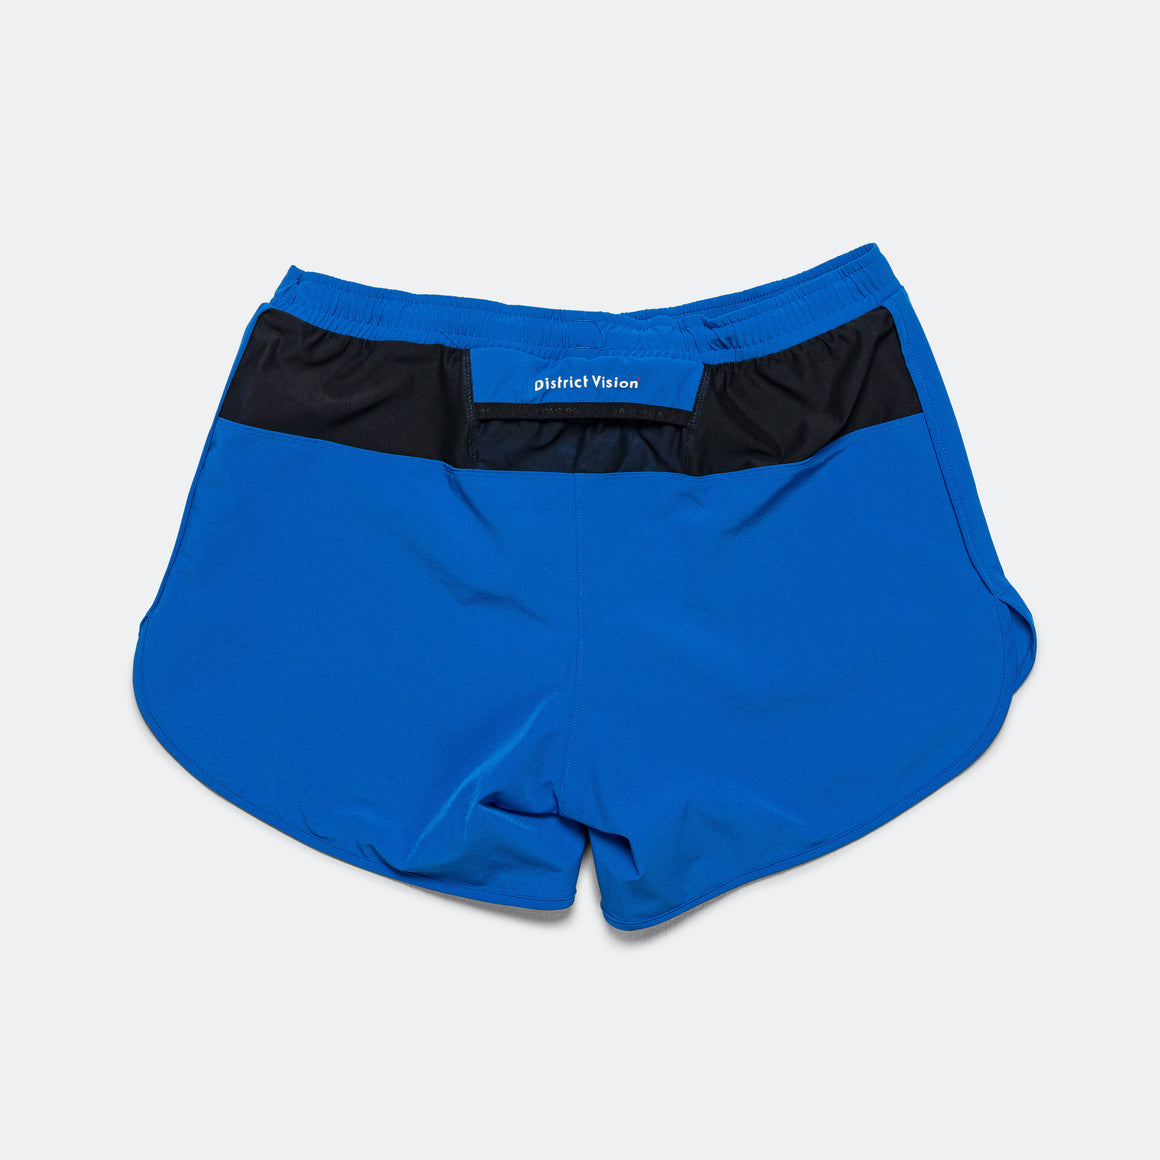 District Vision - Mens 5" Training Shorts - Surf Blue - Up There Athletics